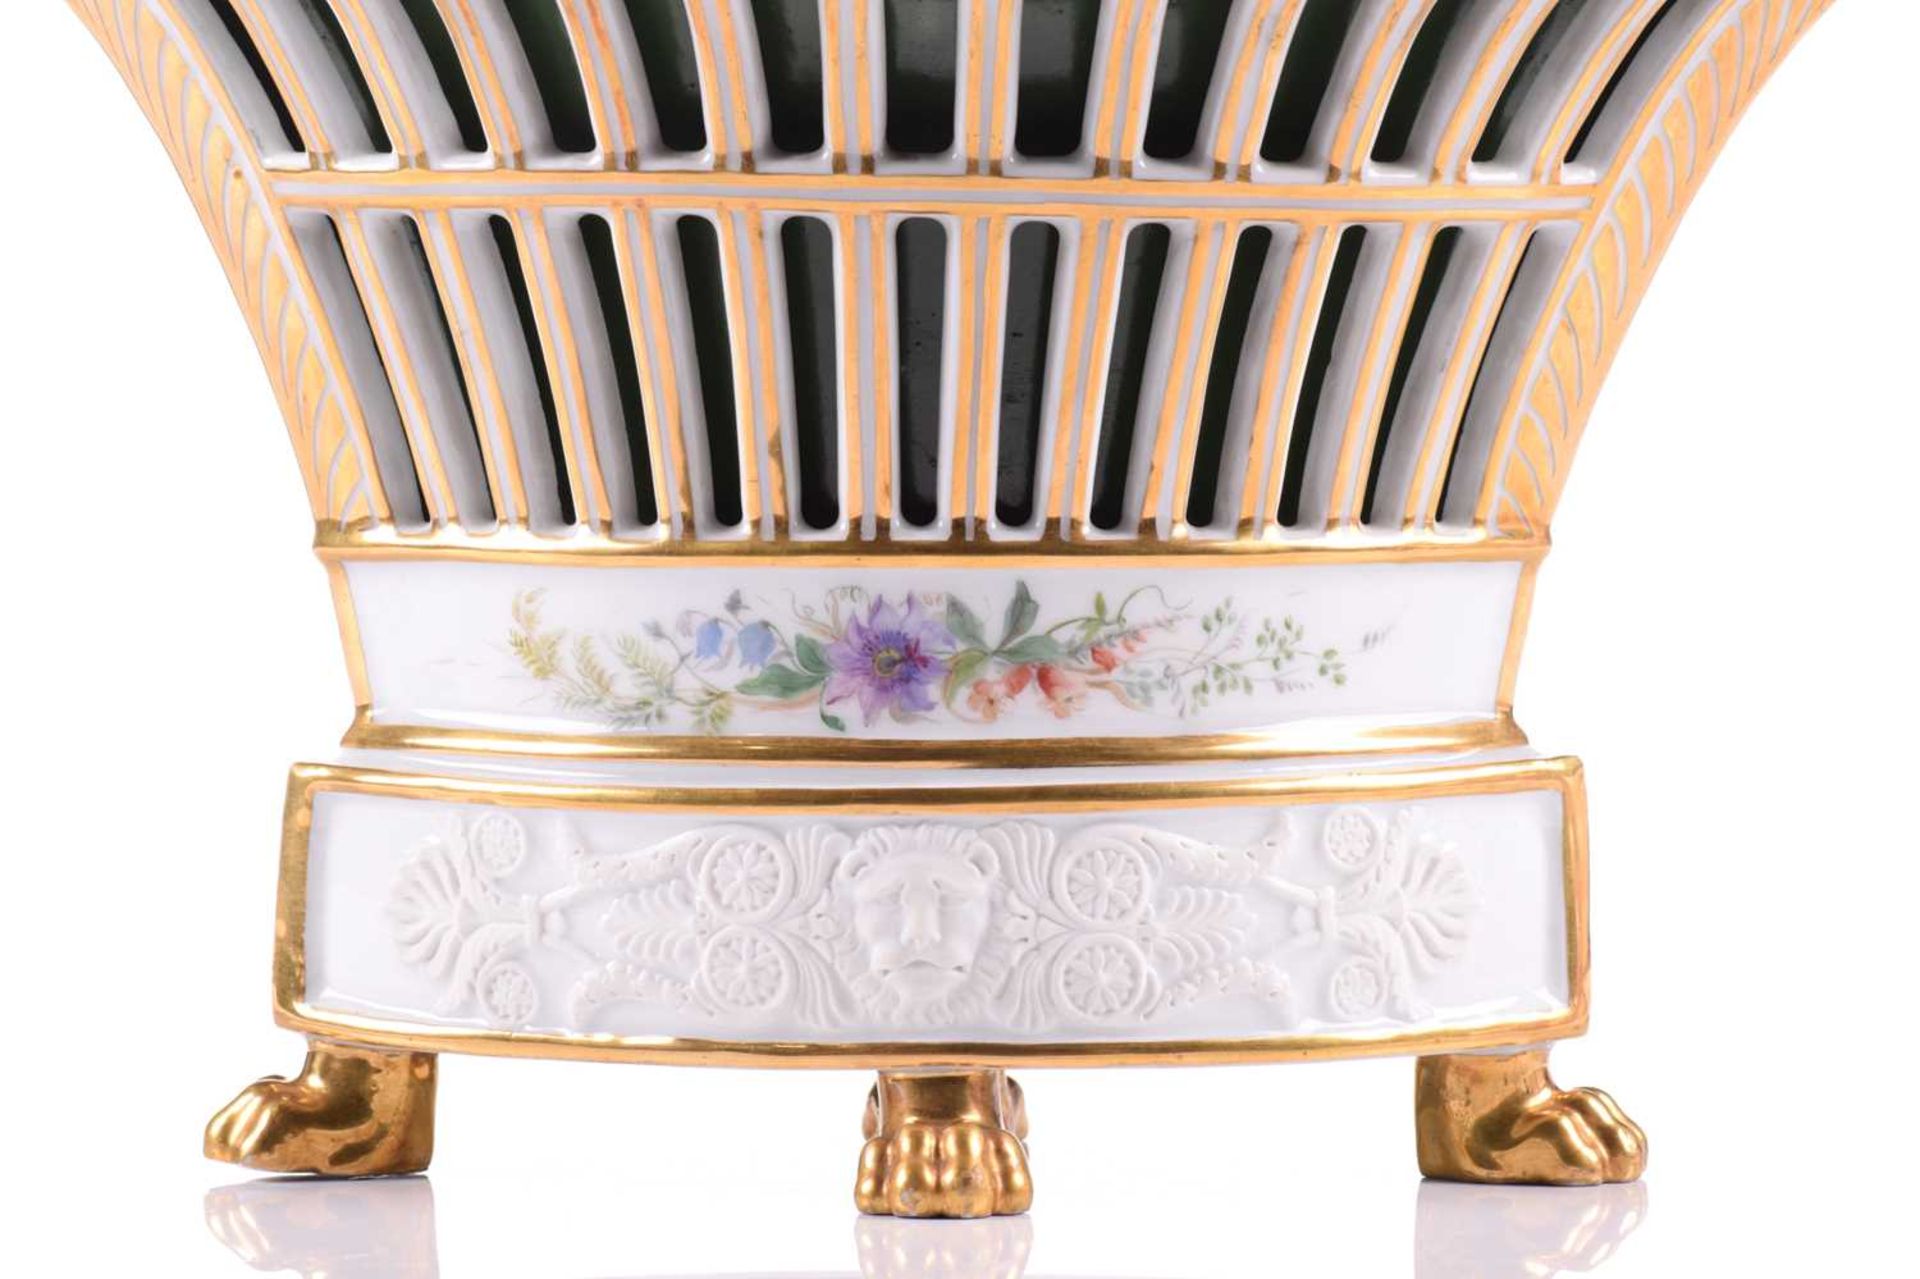 A Vienna bisque porcelain swan sauce boat early 20th century, with a gilded interior, based on an - Image 11 of 21